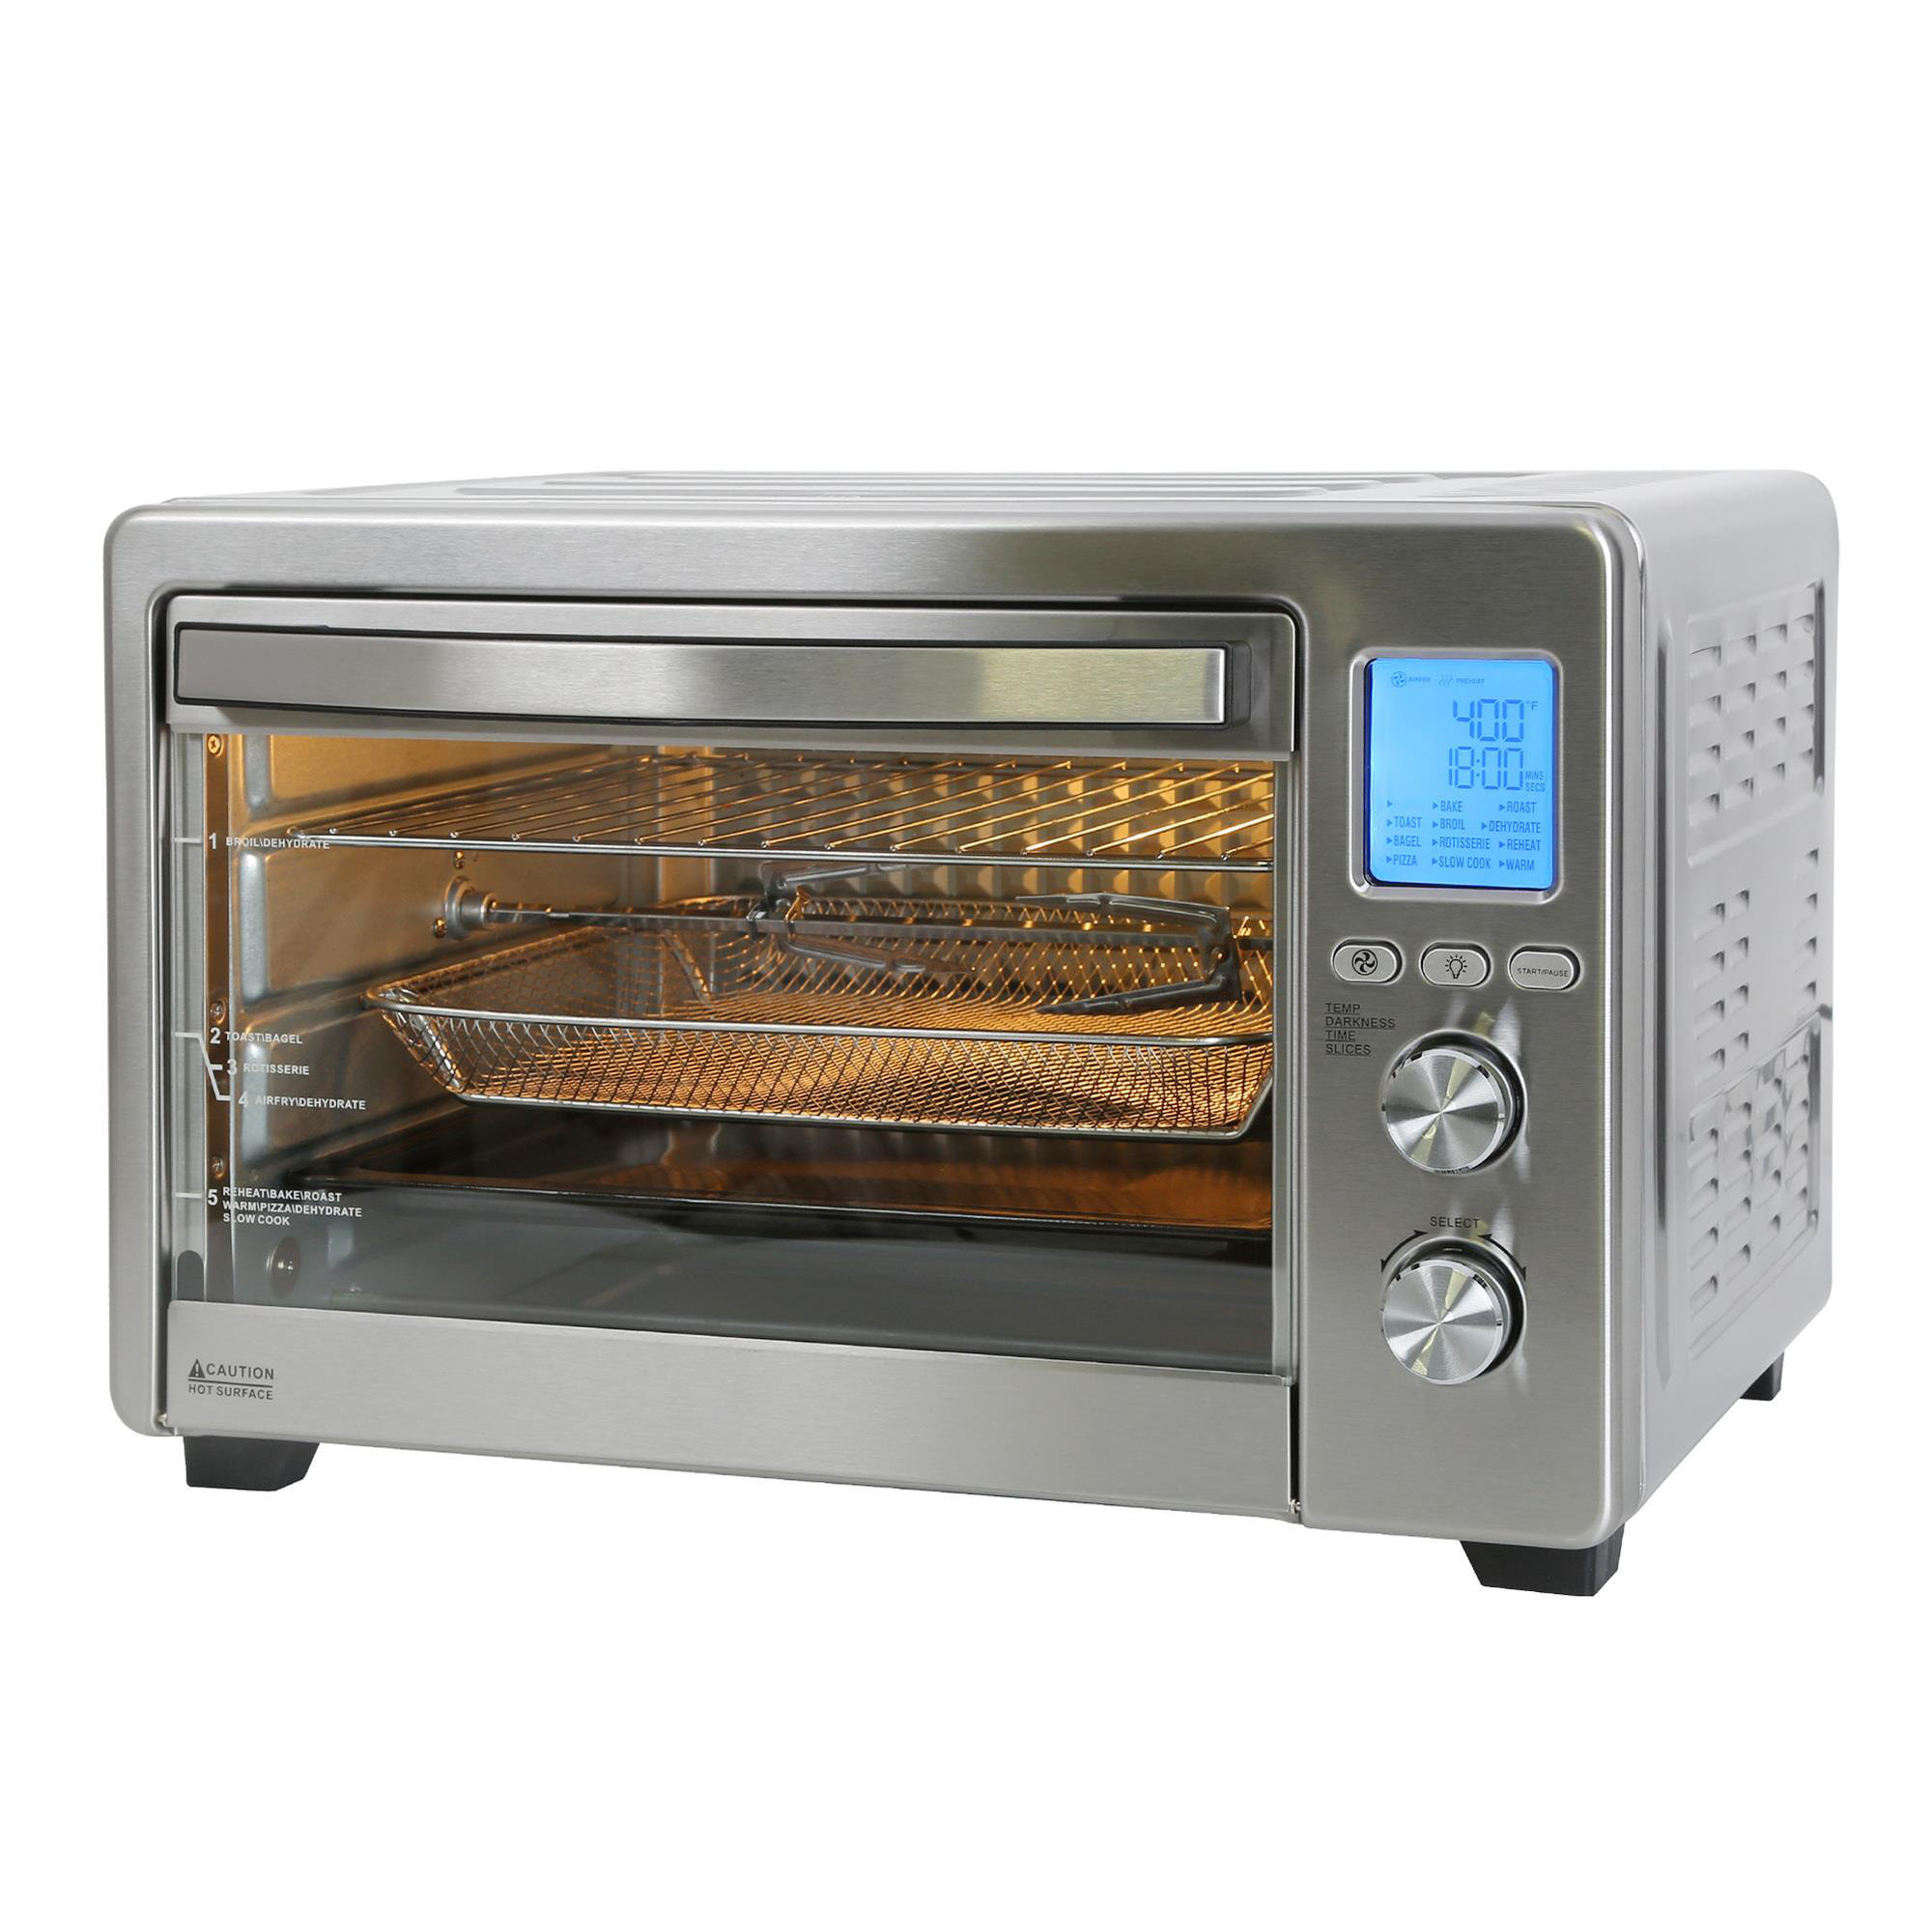 Cosmo Air Fryer Toaster Oven with Rotisserie & Reviews